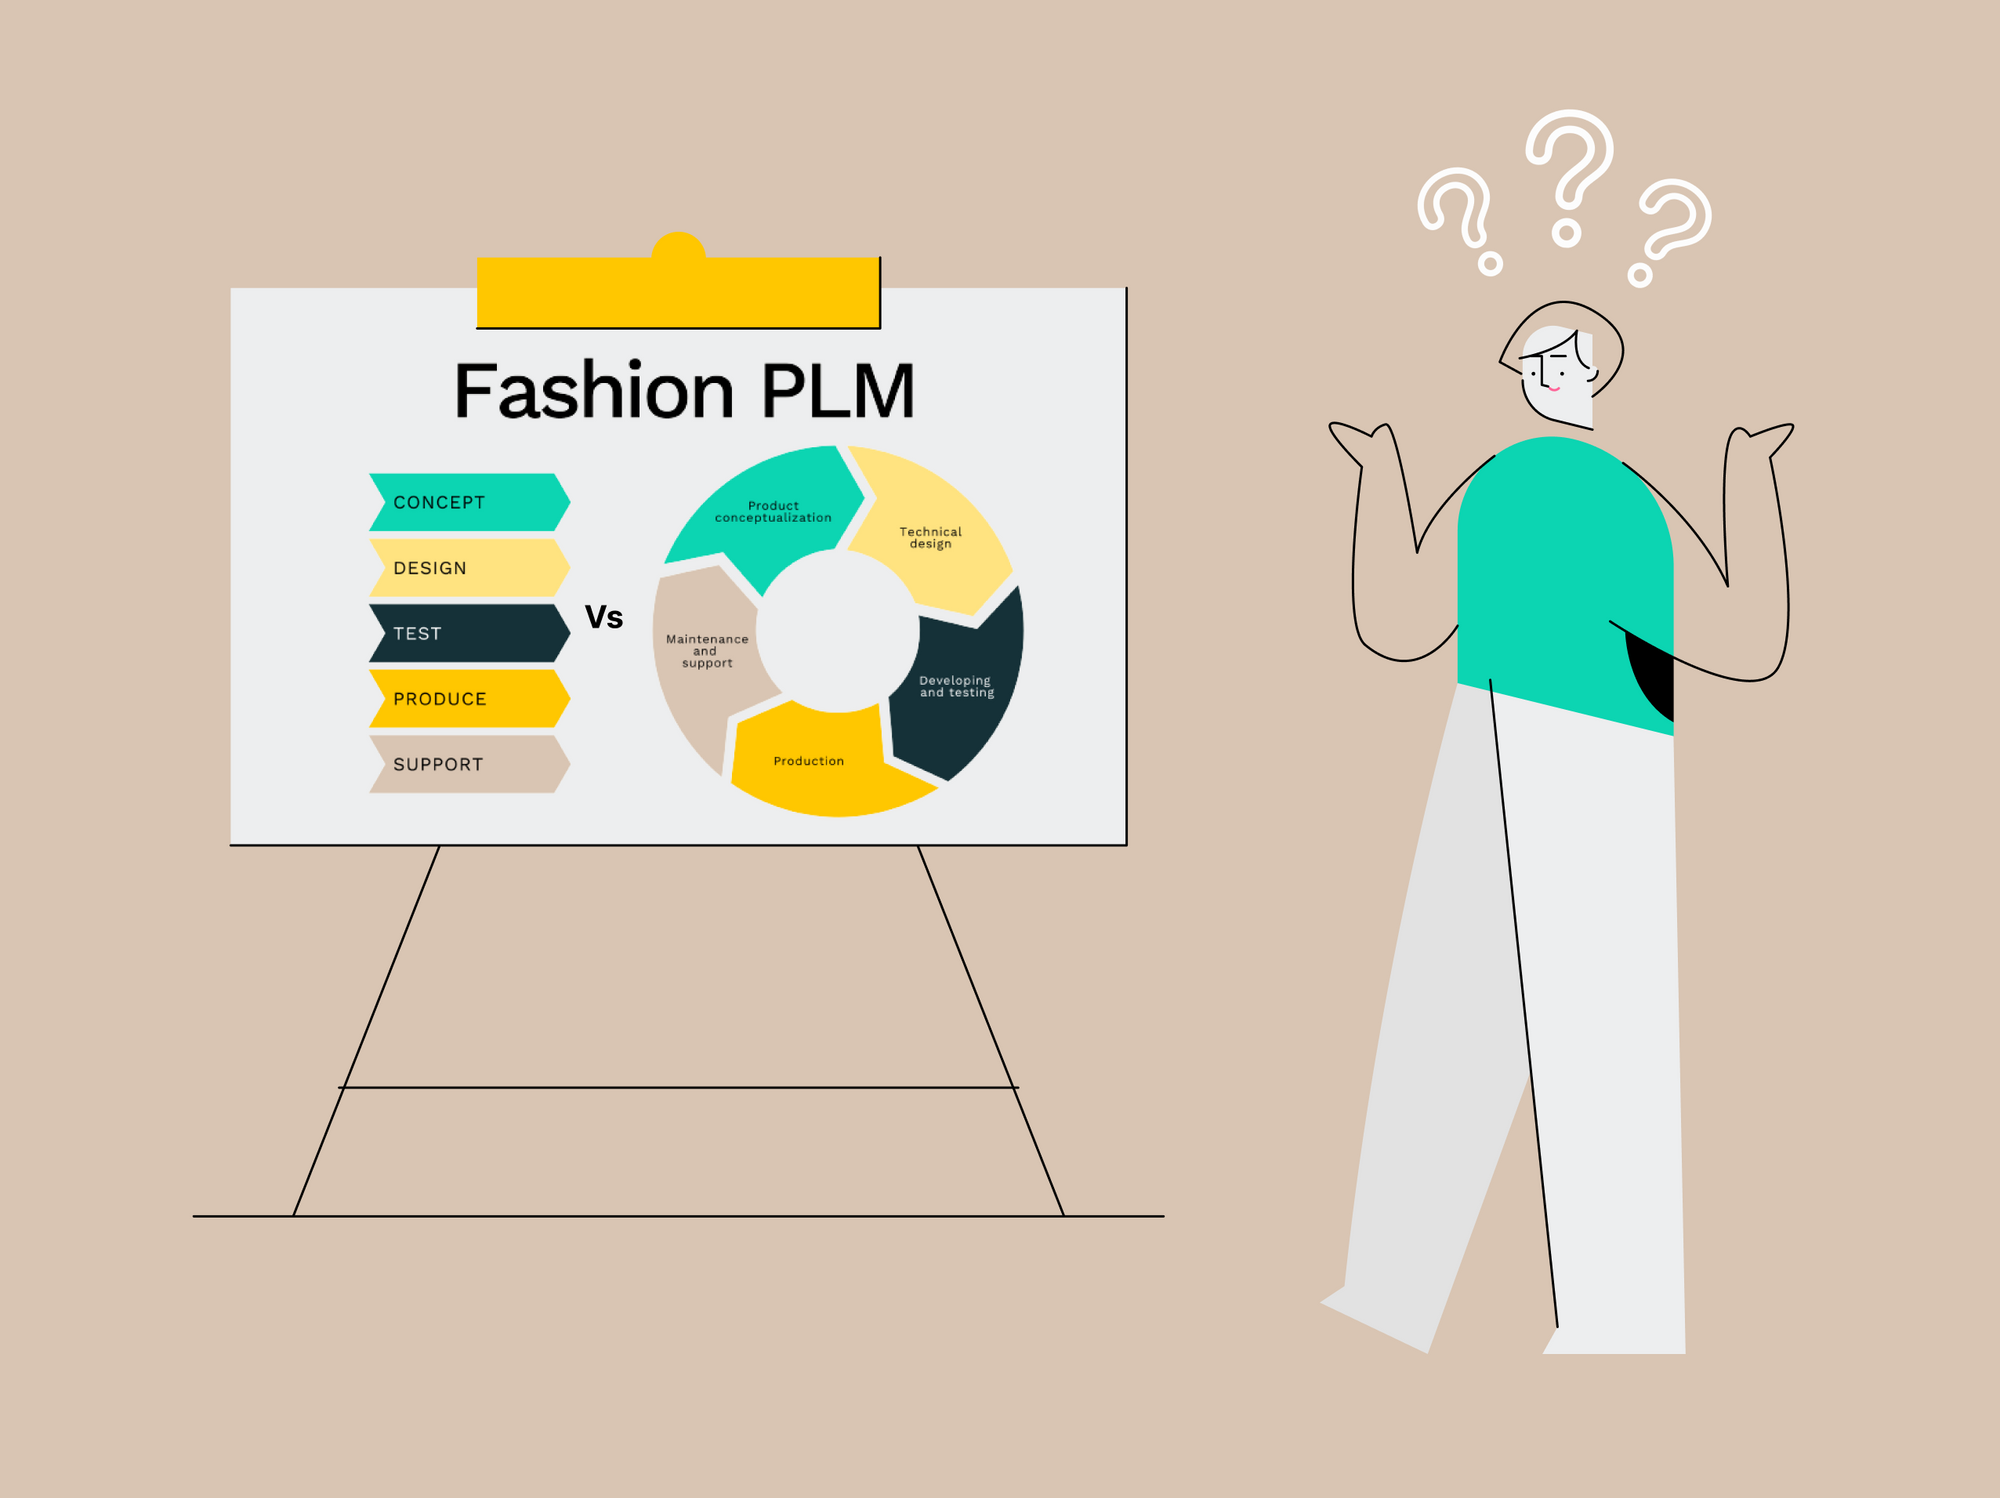 The challenges of adopting a PLM in the fashion business